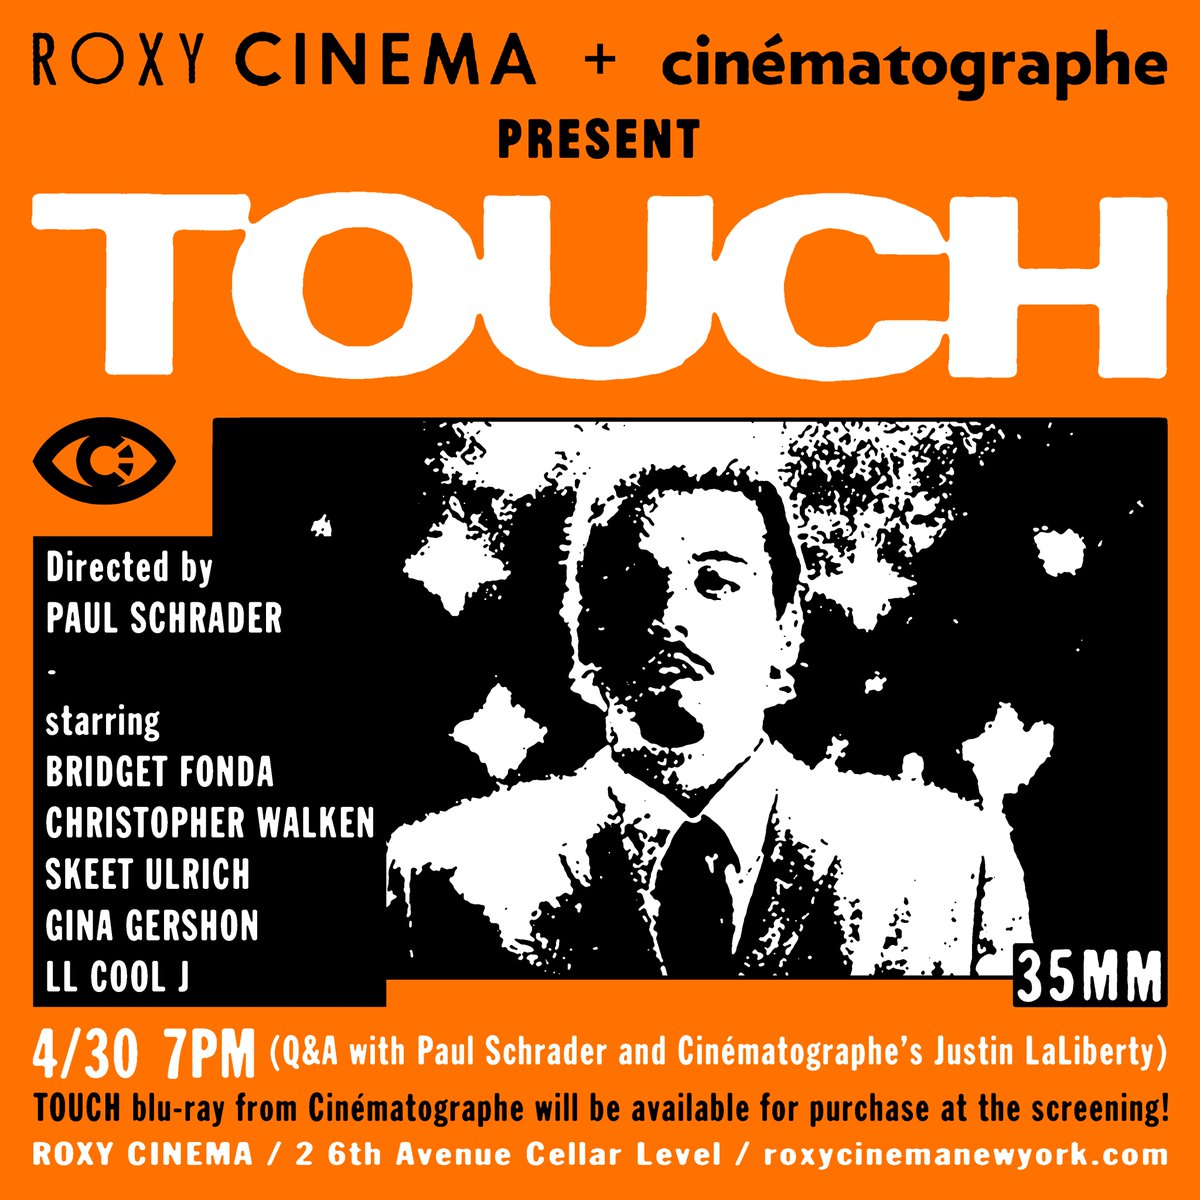 Tonight! 35mm screening of TOUCH at @RoxyCinemaNYC with Paul Schrader *in person* for a post-film Q&A. Pick up some discs and swag while you’re at it! Also, be sure to follow @cine_matographe for the latest Cinématographe news and events.